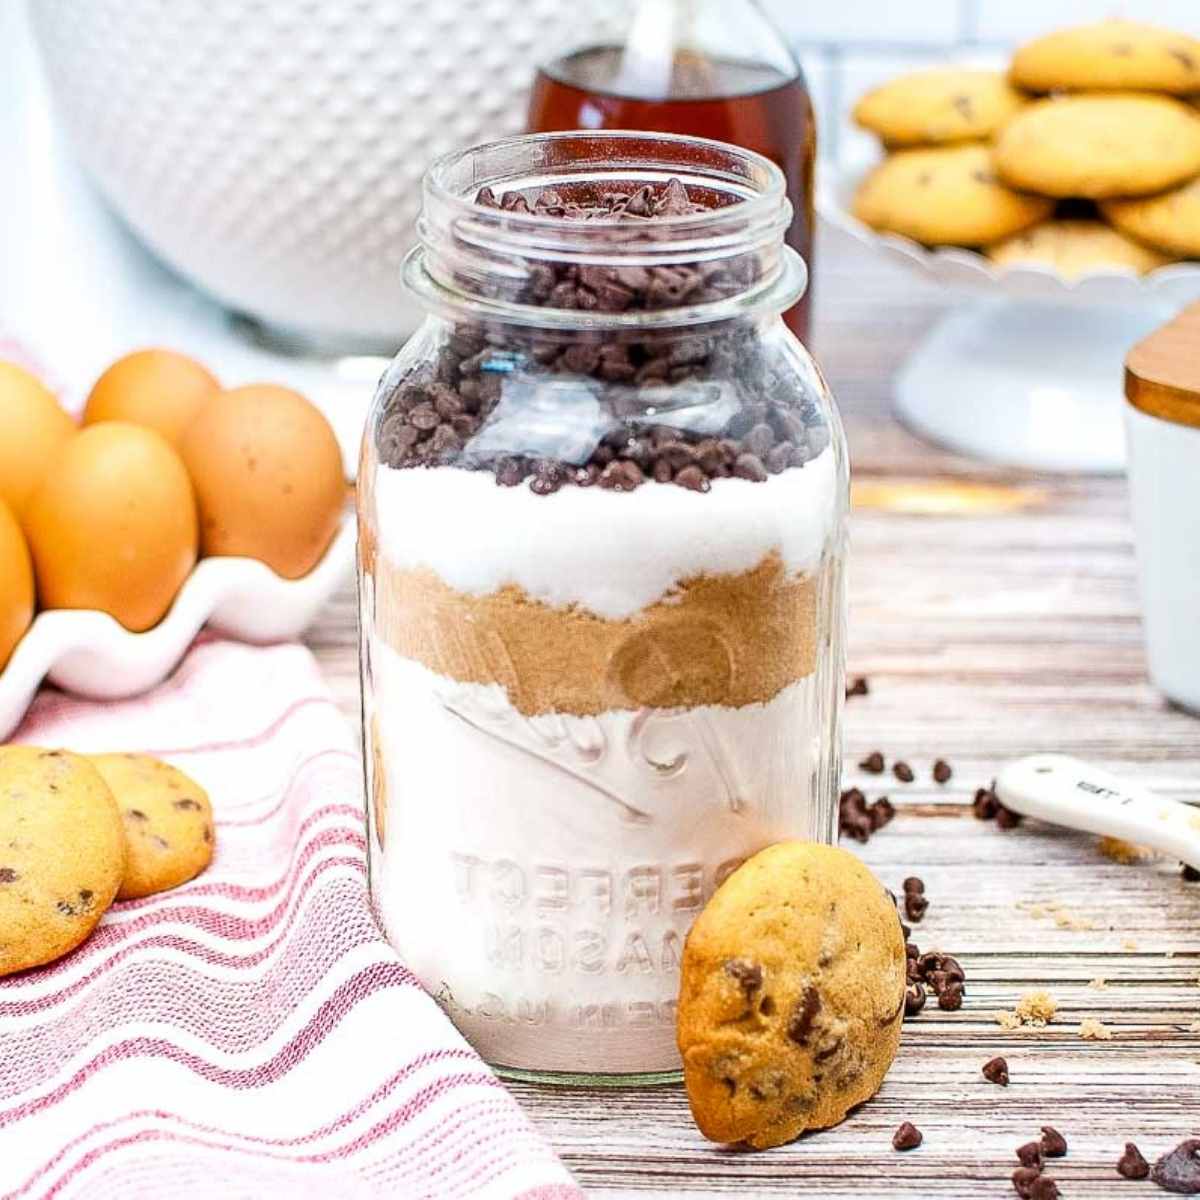 84 Best Cookies And Bars To Fill Your Cookie Jar